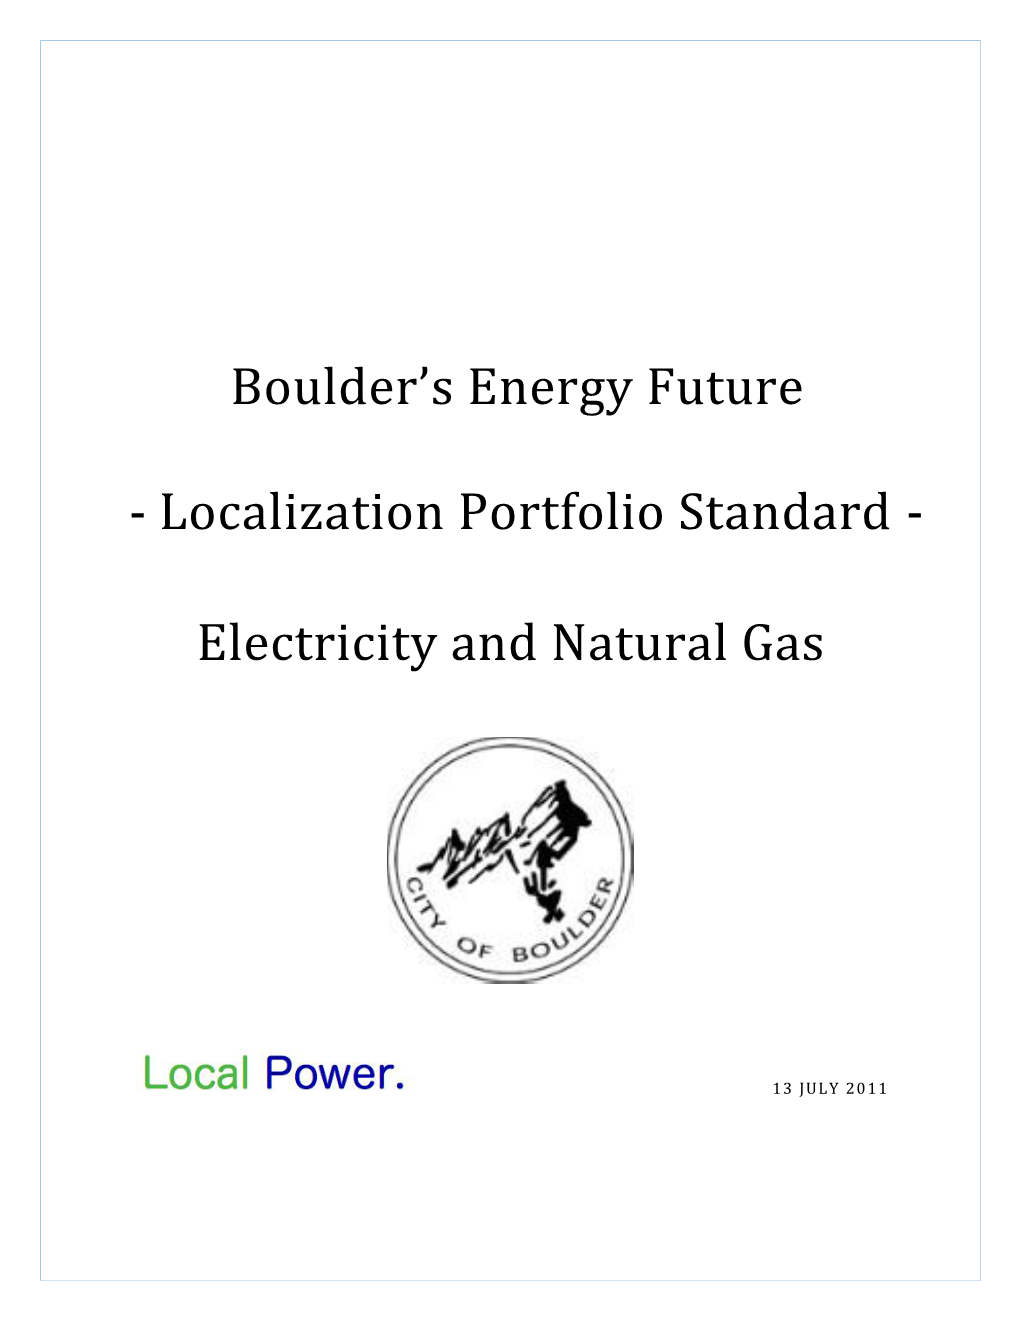 Electricity and Natural Gas